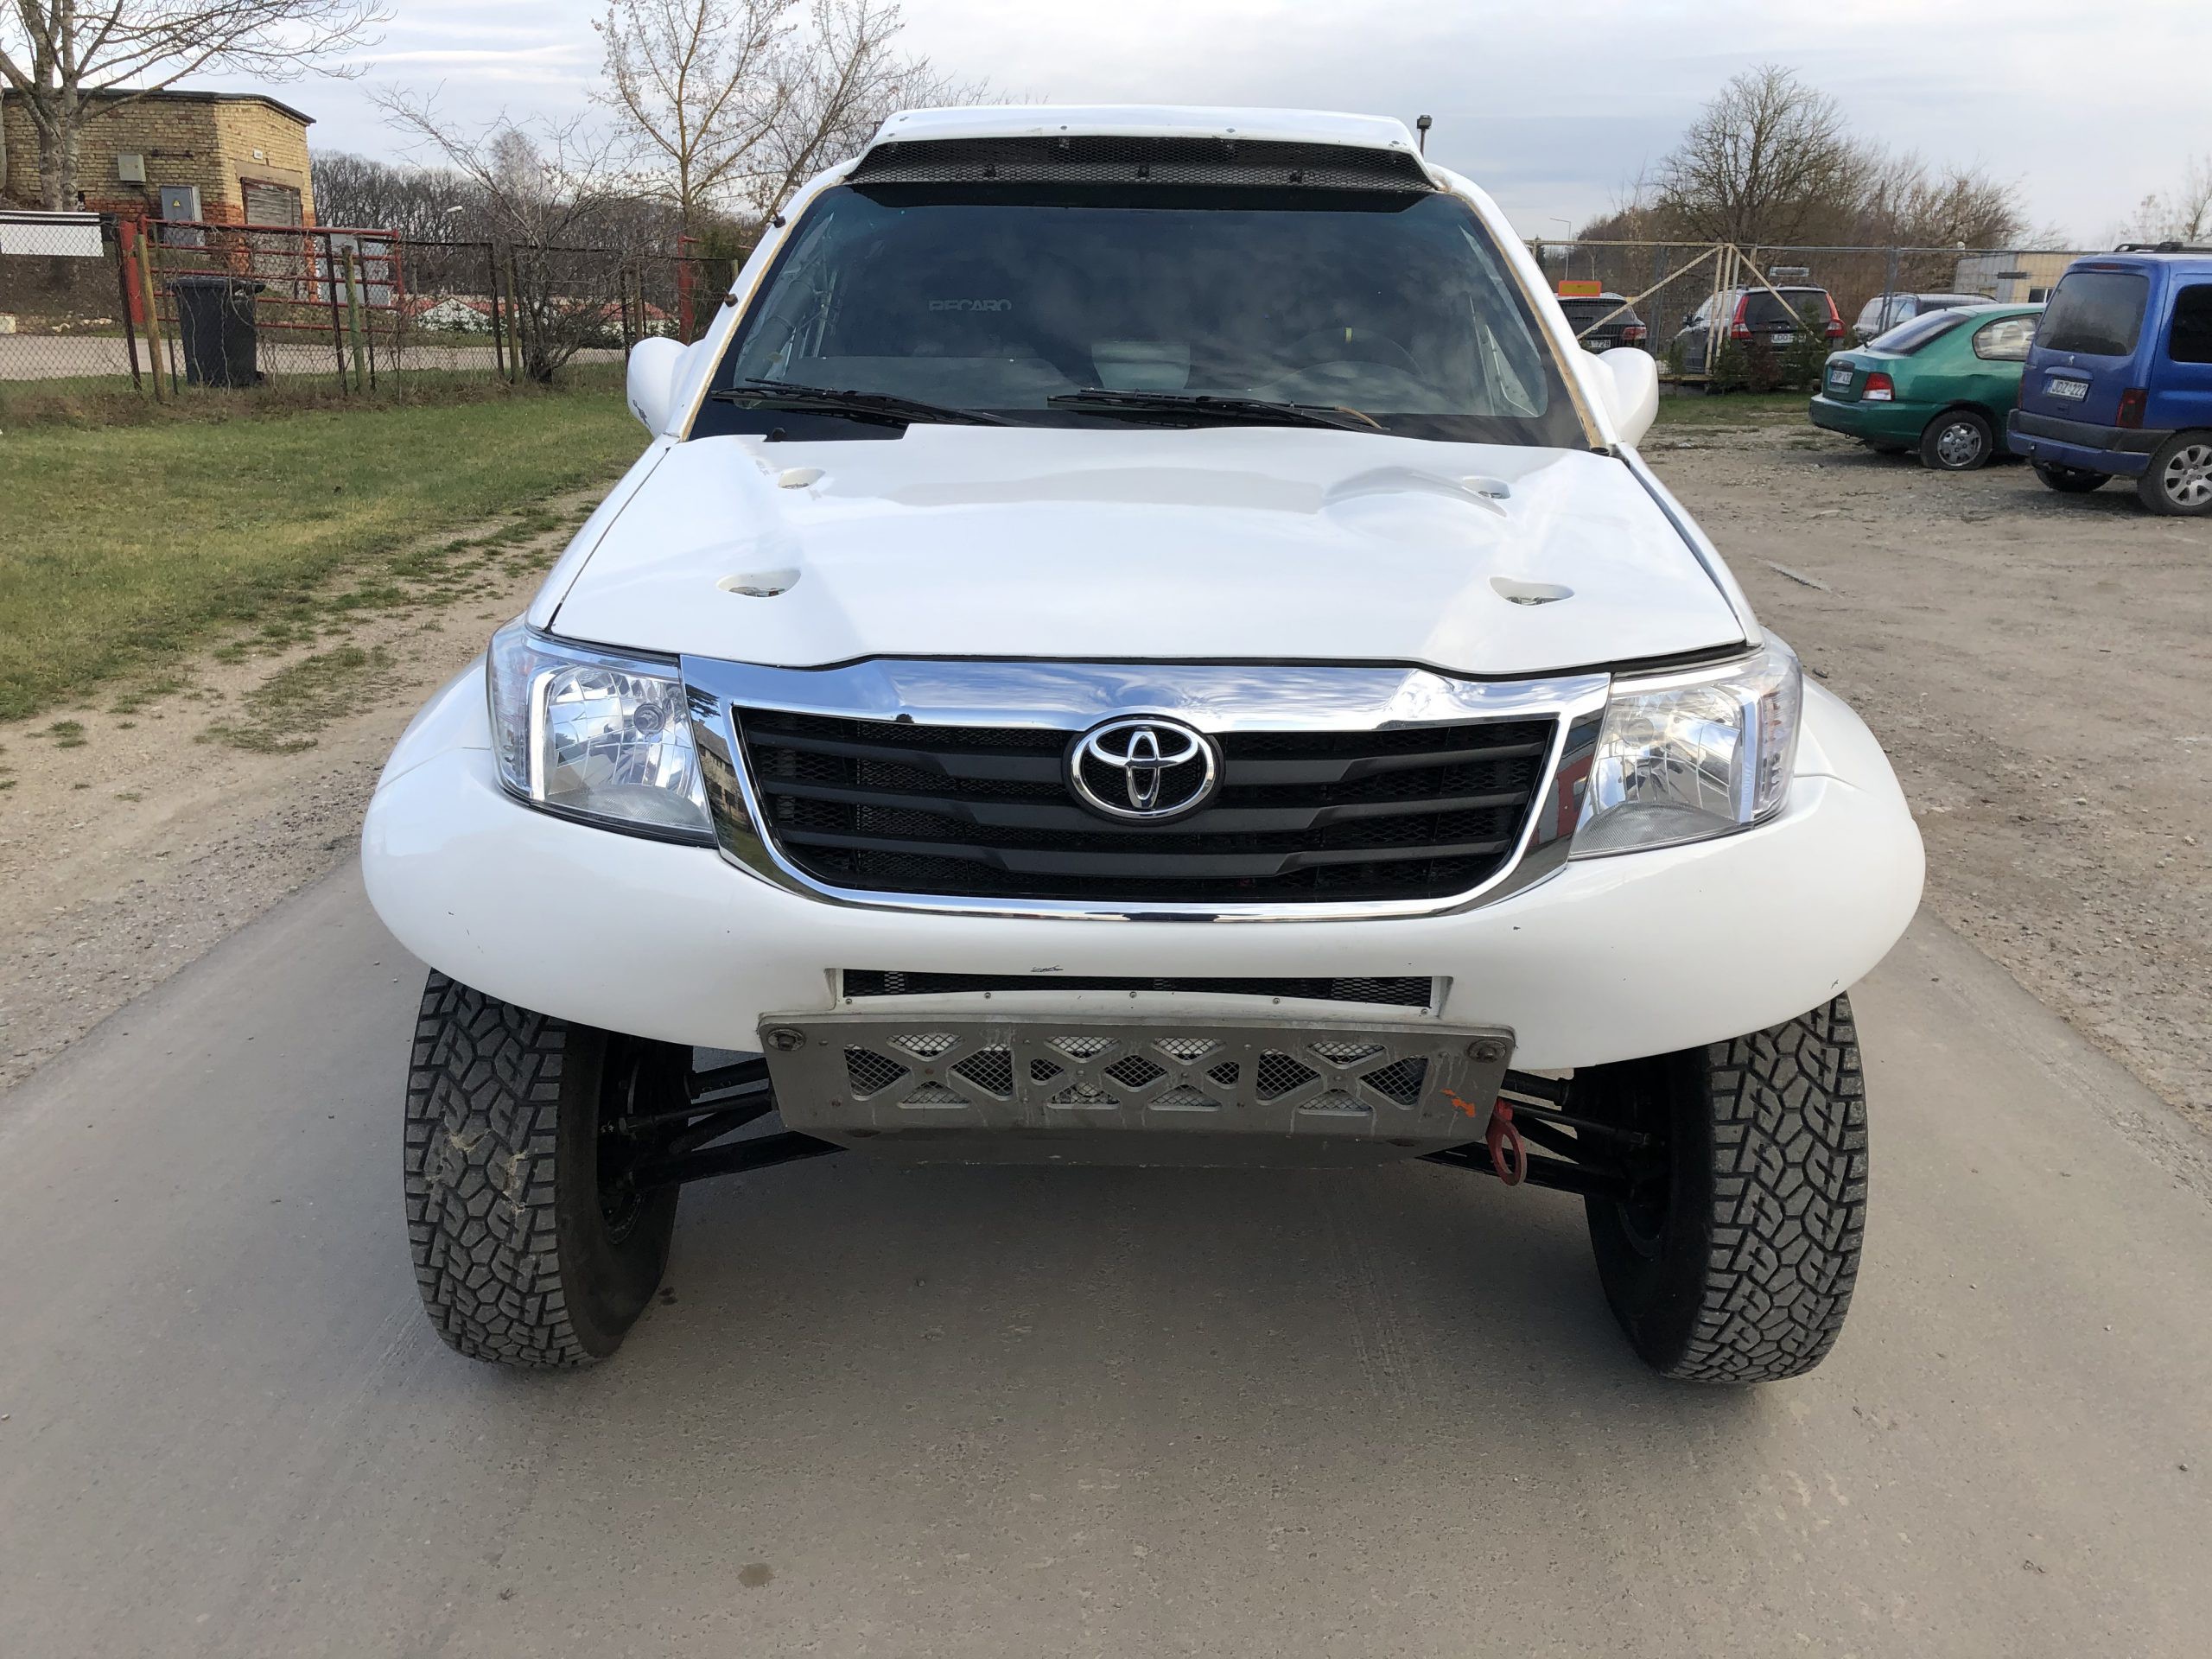 Toyota Hilux Overdrive